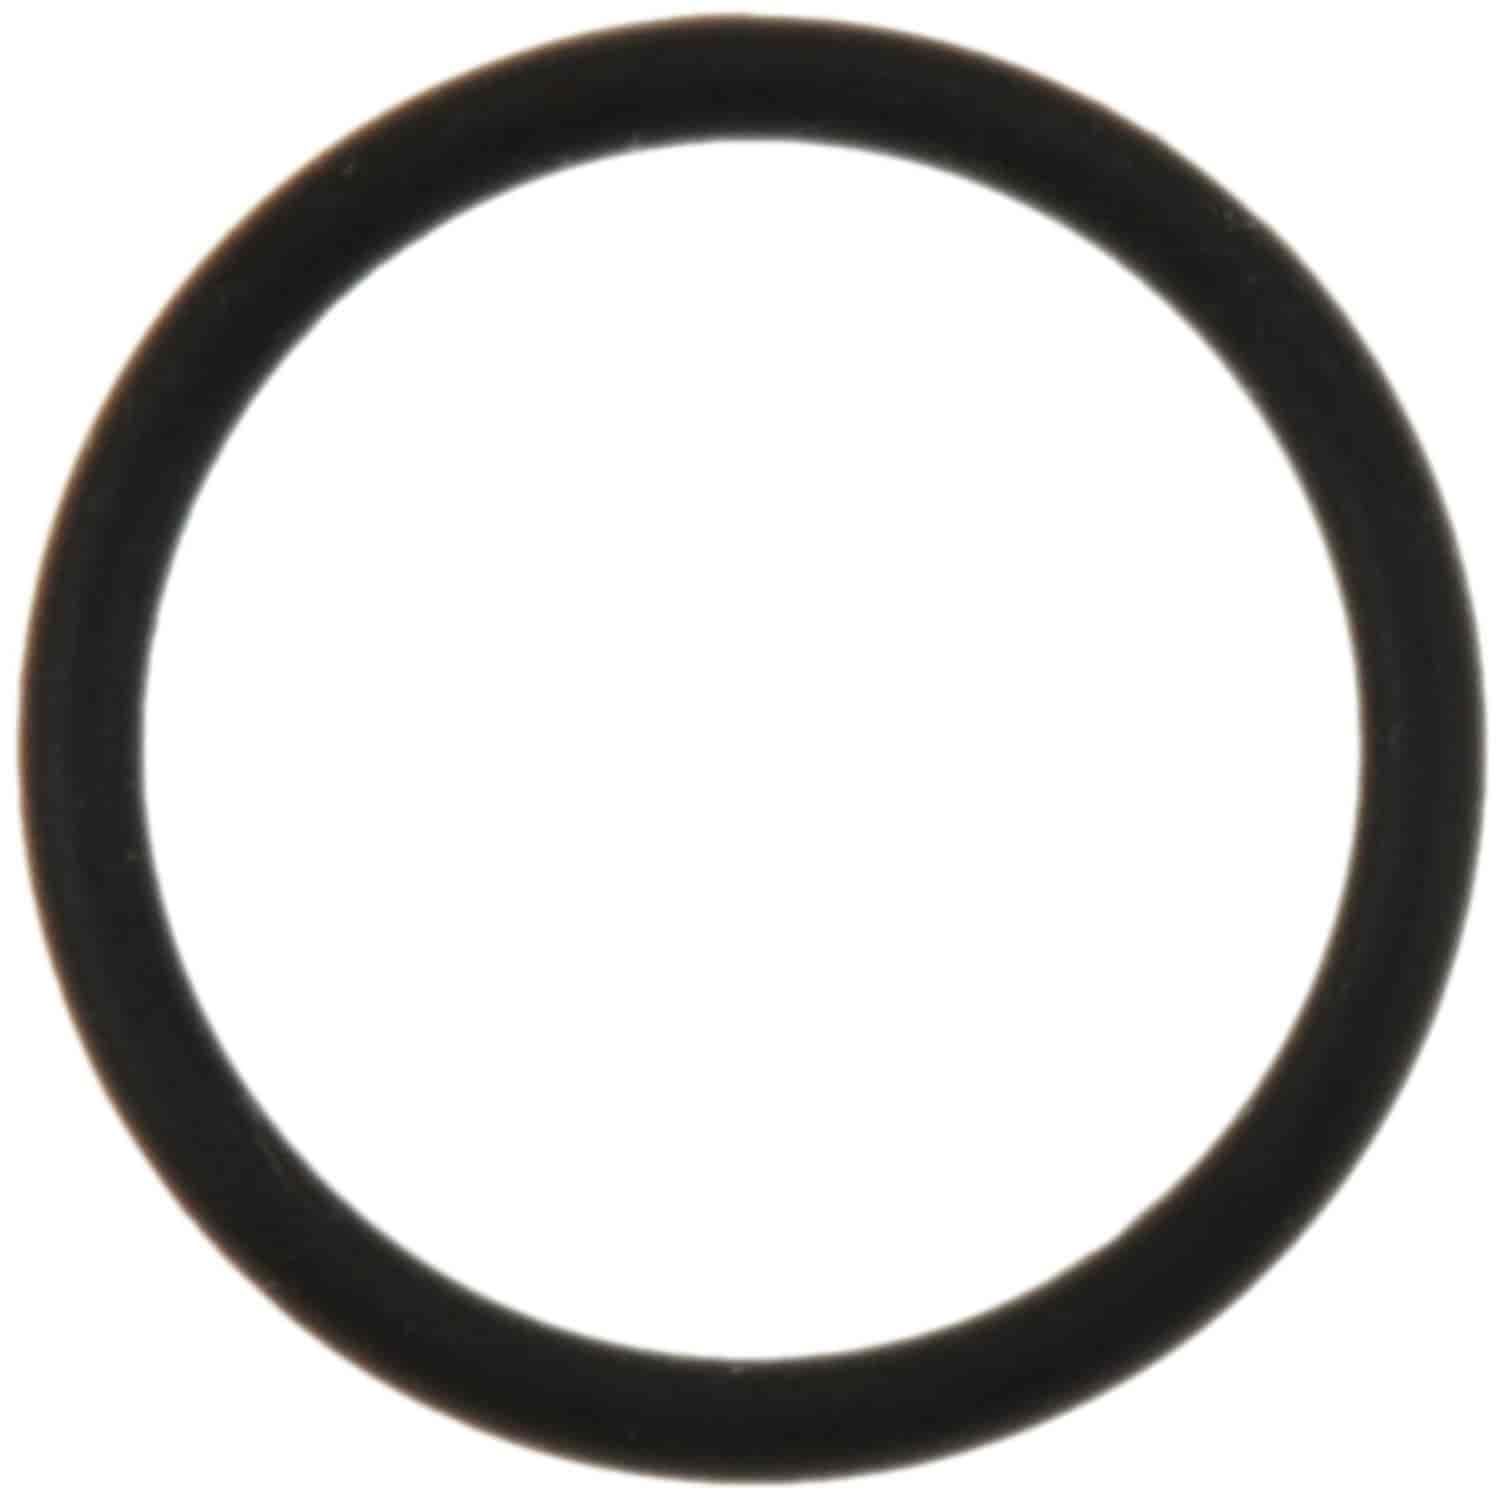 Water Pipe Sealing Ring MERCEDES 1796CC 1.8L DOHC